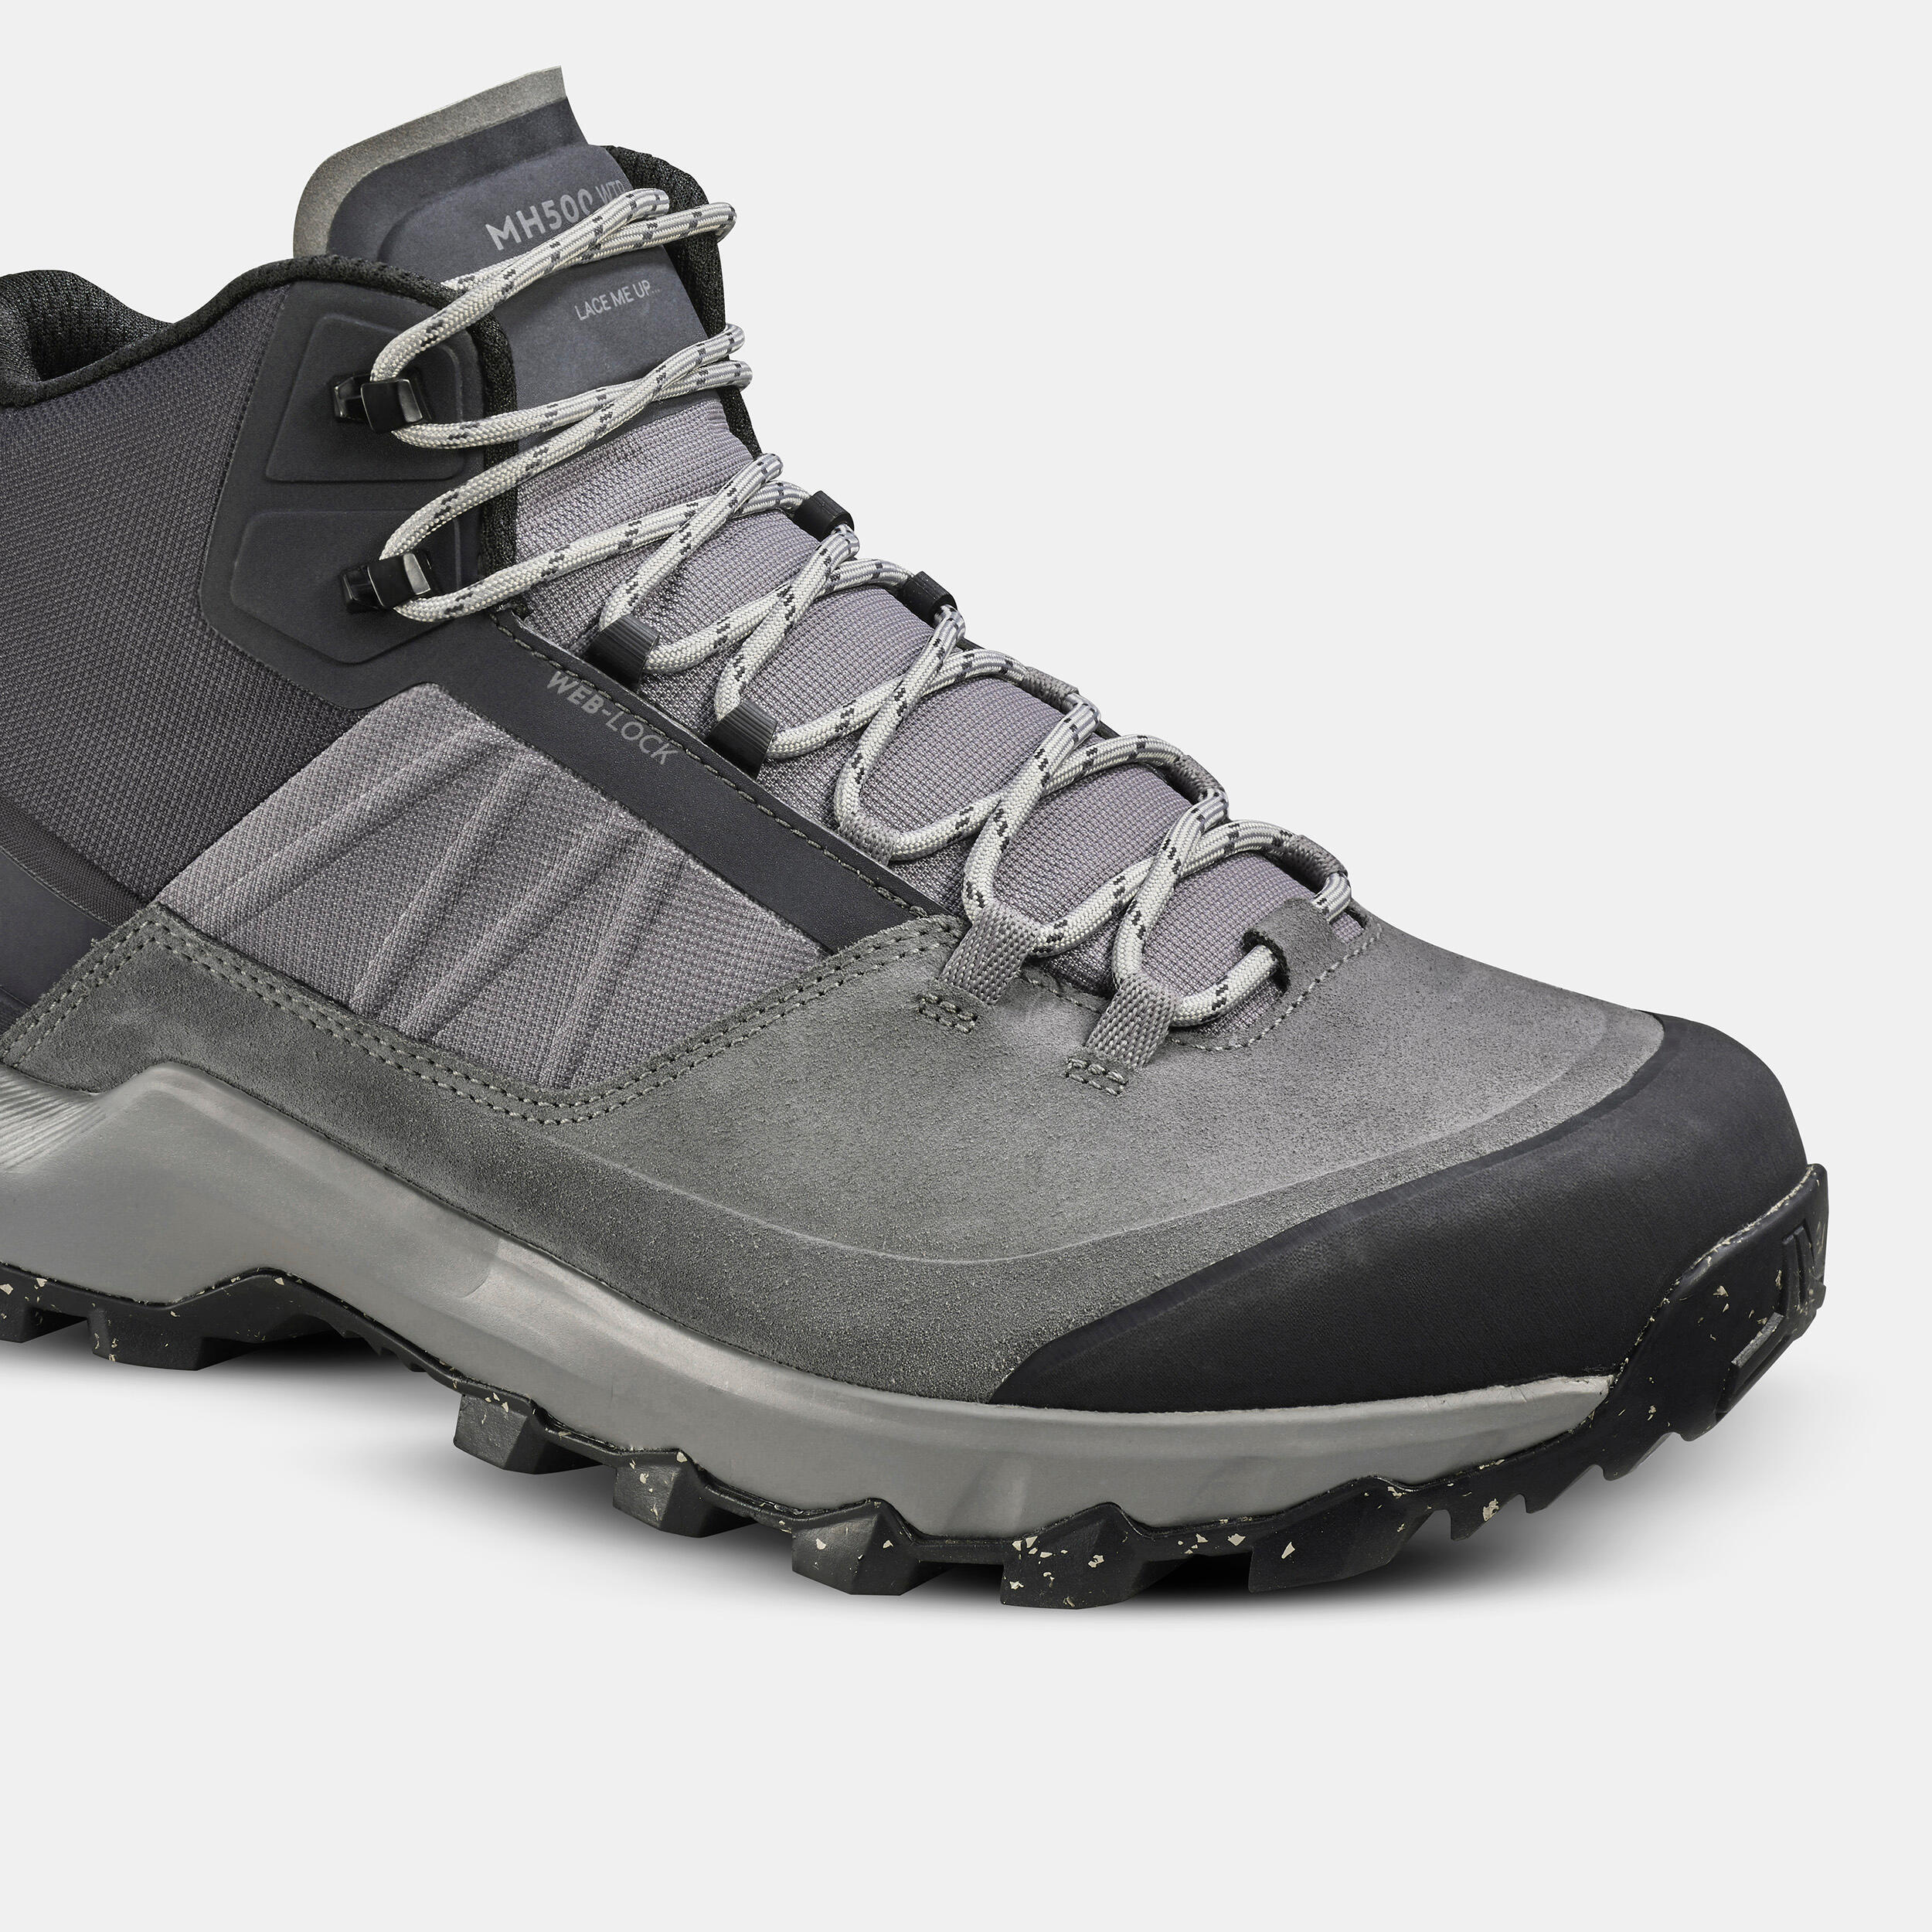 Men's waterproof mountain hiking shoes - MH500 Mid - Grey 6/6